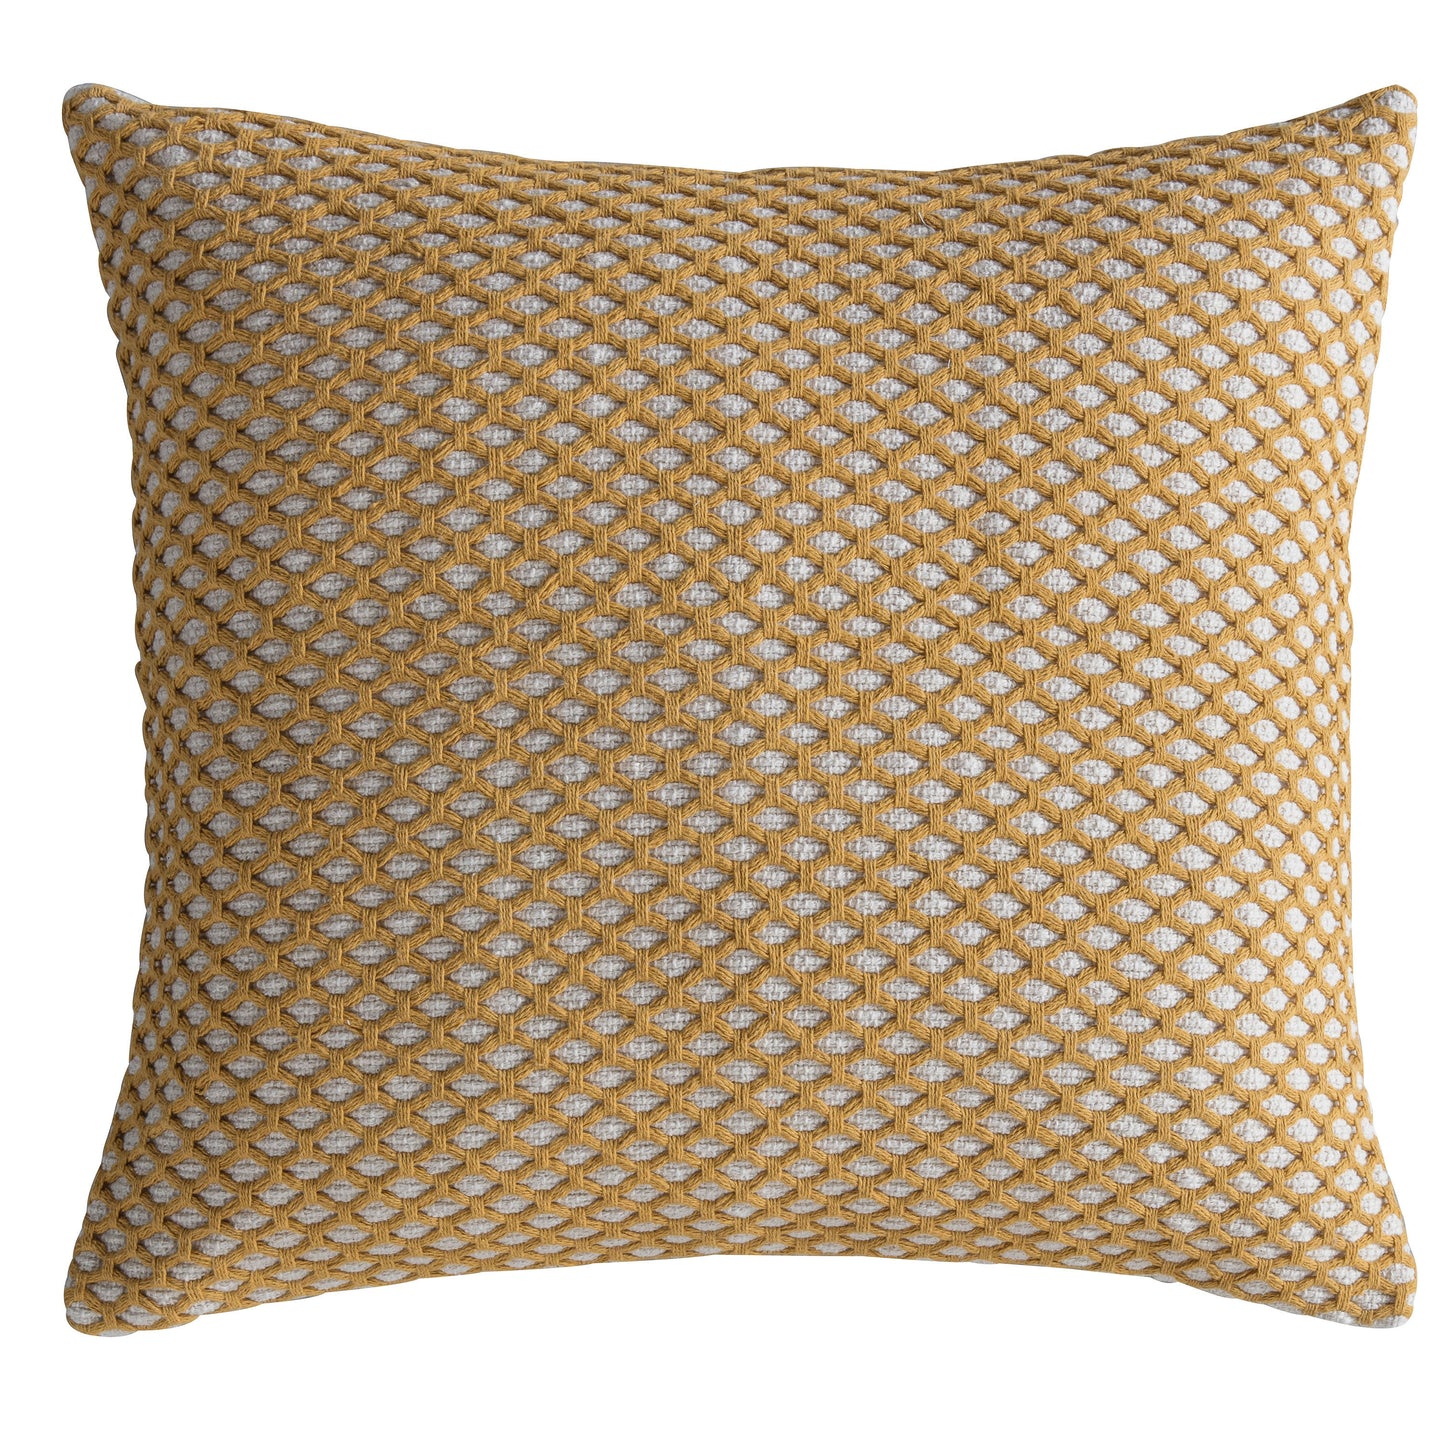 A geometric-patterned Bittaford Cushion Ochre 550x550mm for interior decor from Kikiathome.co.uk